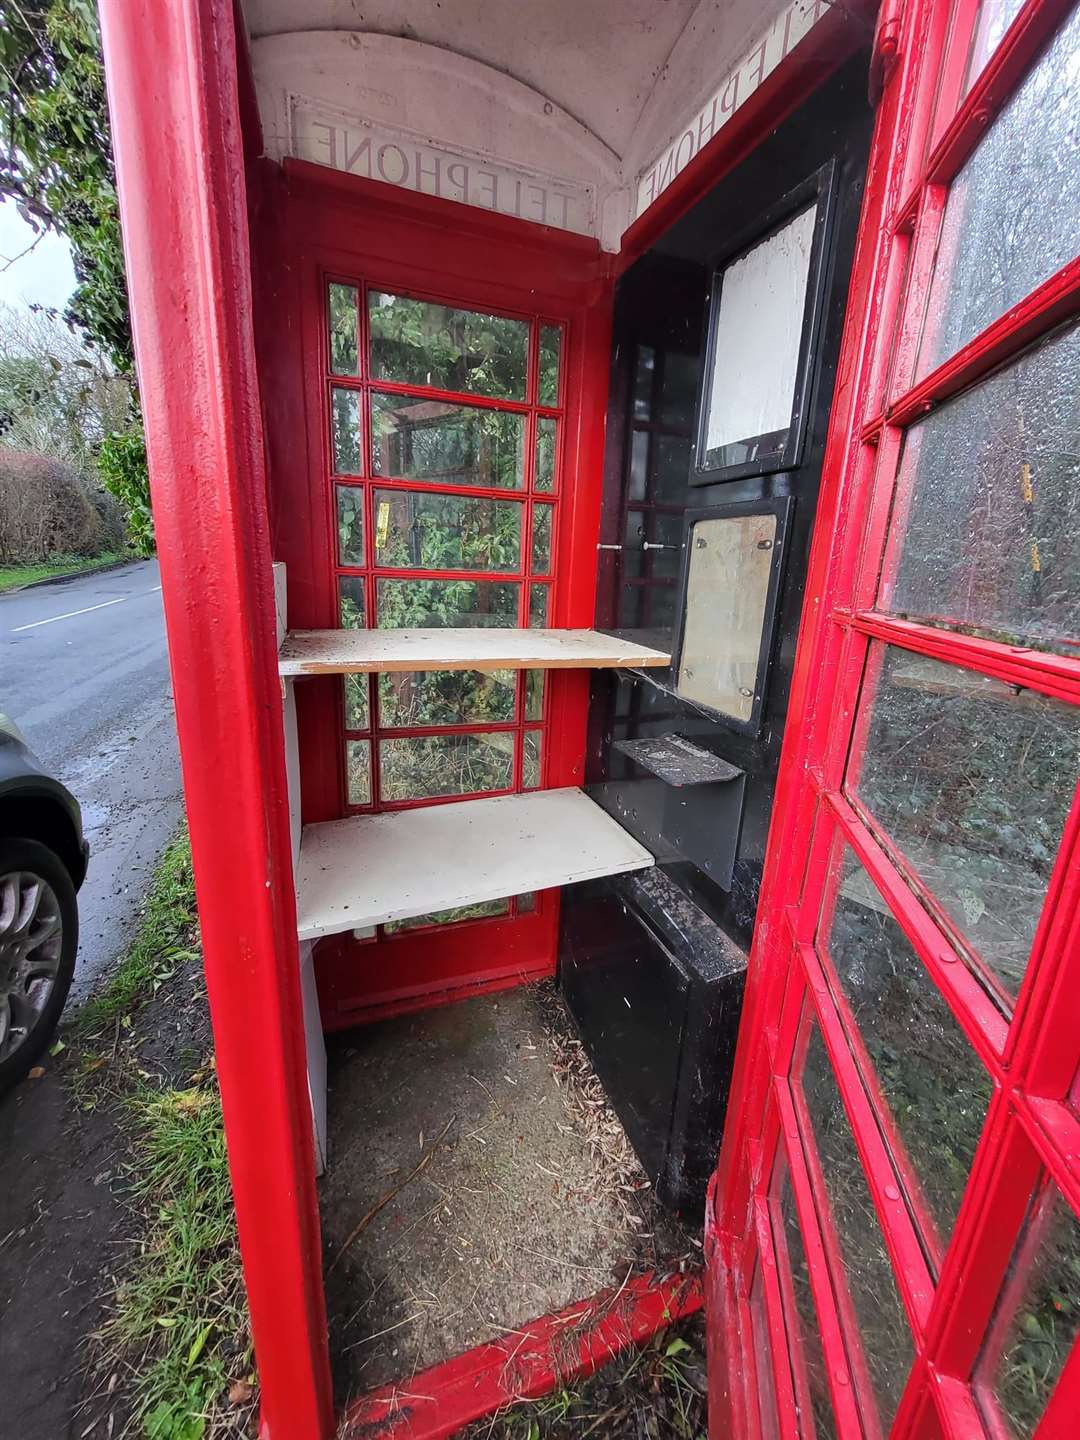 The telephone box library before (Iona Connolly/PA)